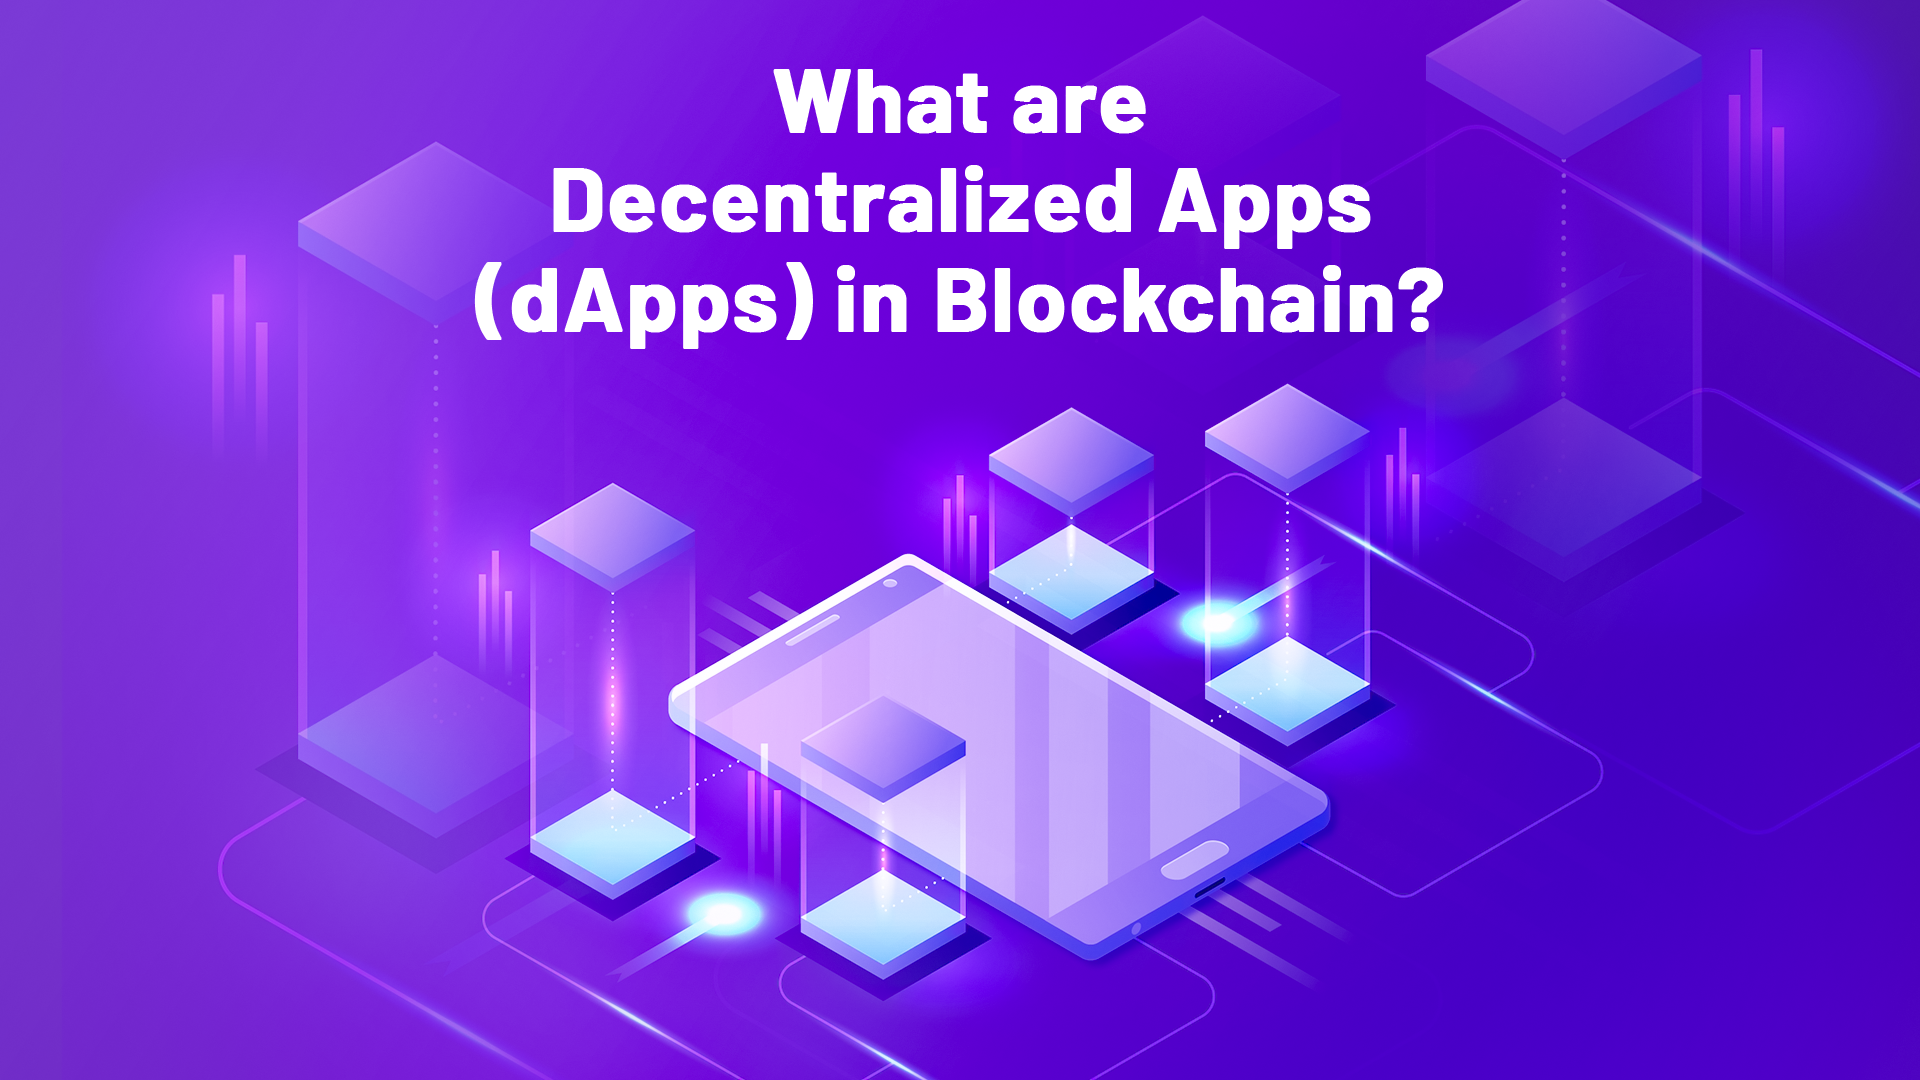 What are Decentralized Apps (dApps) in Blockchain?